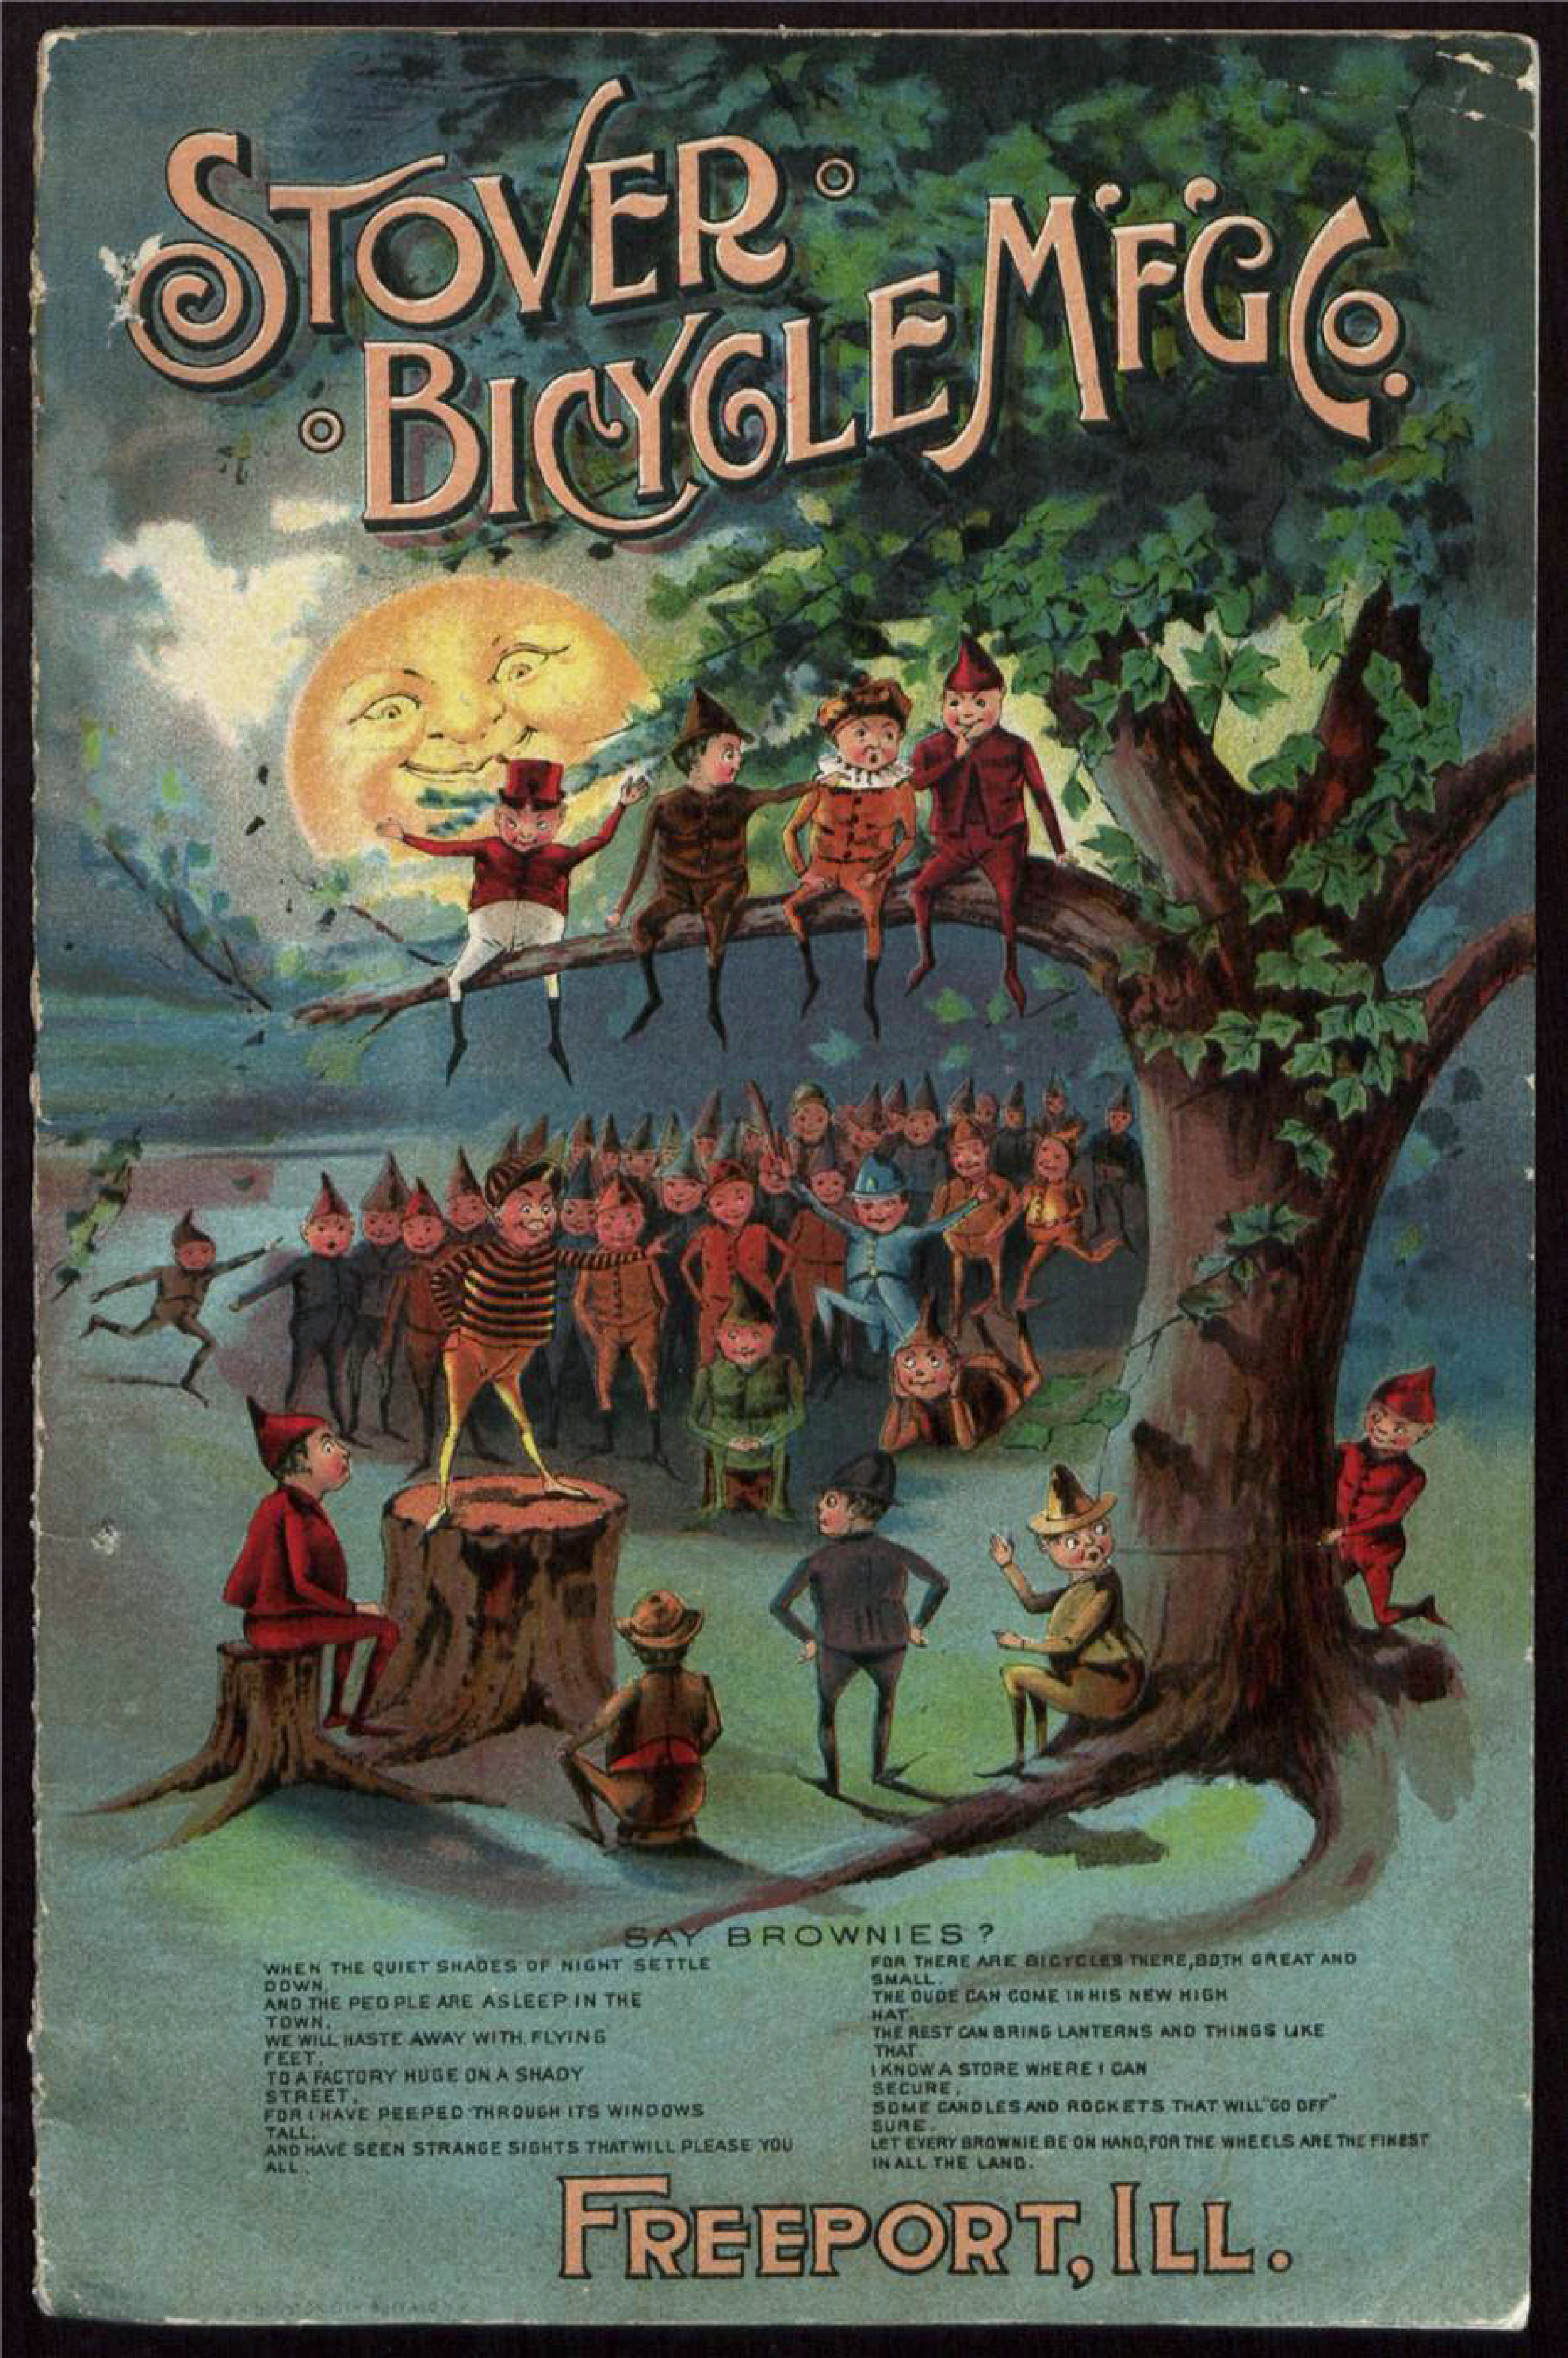 Cover of a bicycle catalog from 1894 with an illustration of brownies frolicking in the moonlight.